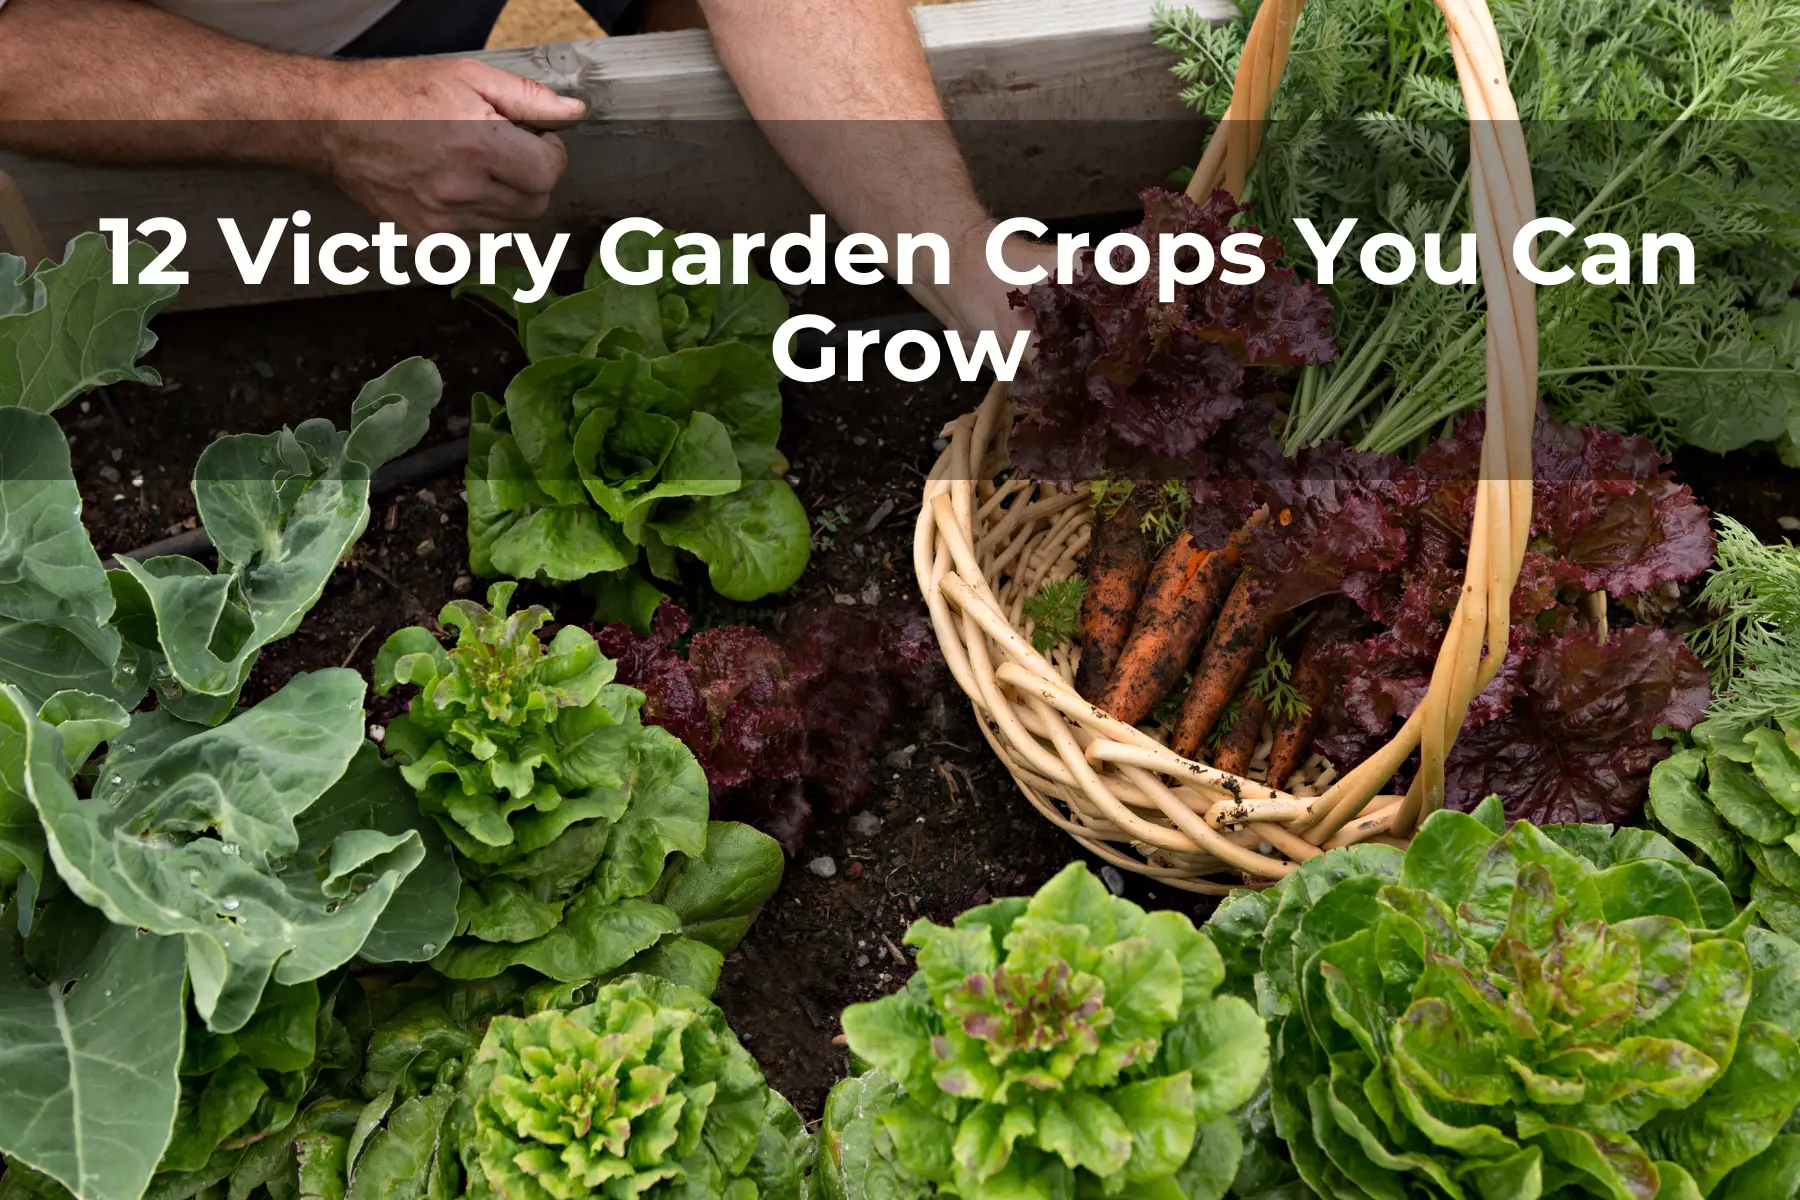 12 Victory Garden Crops You Can Grow